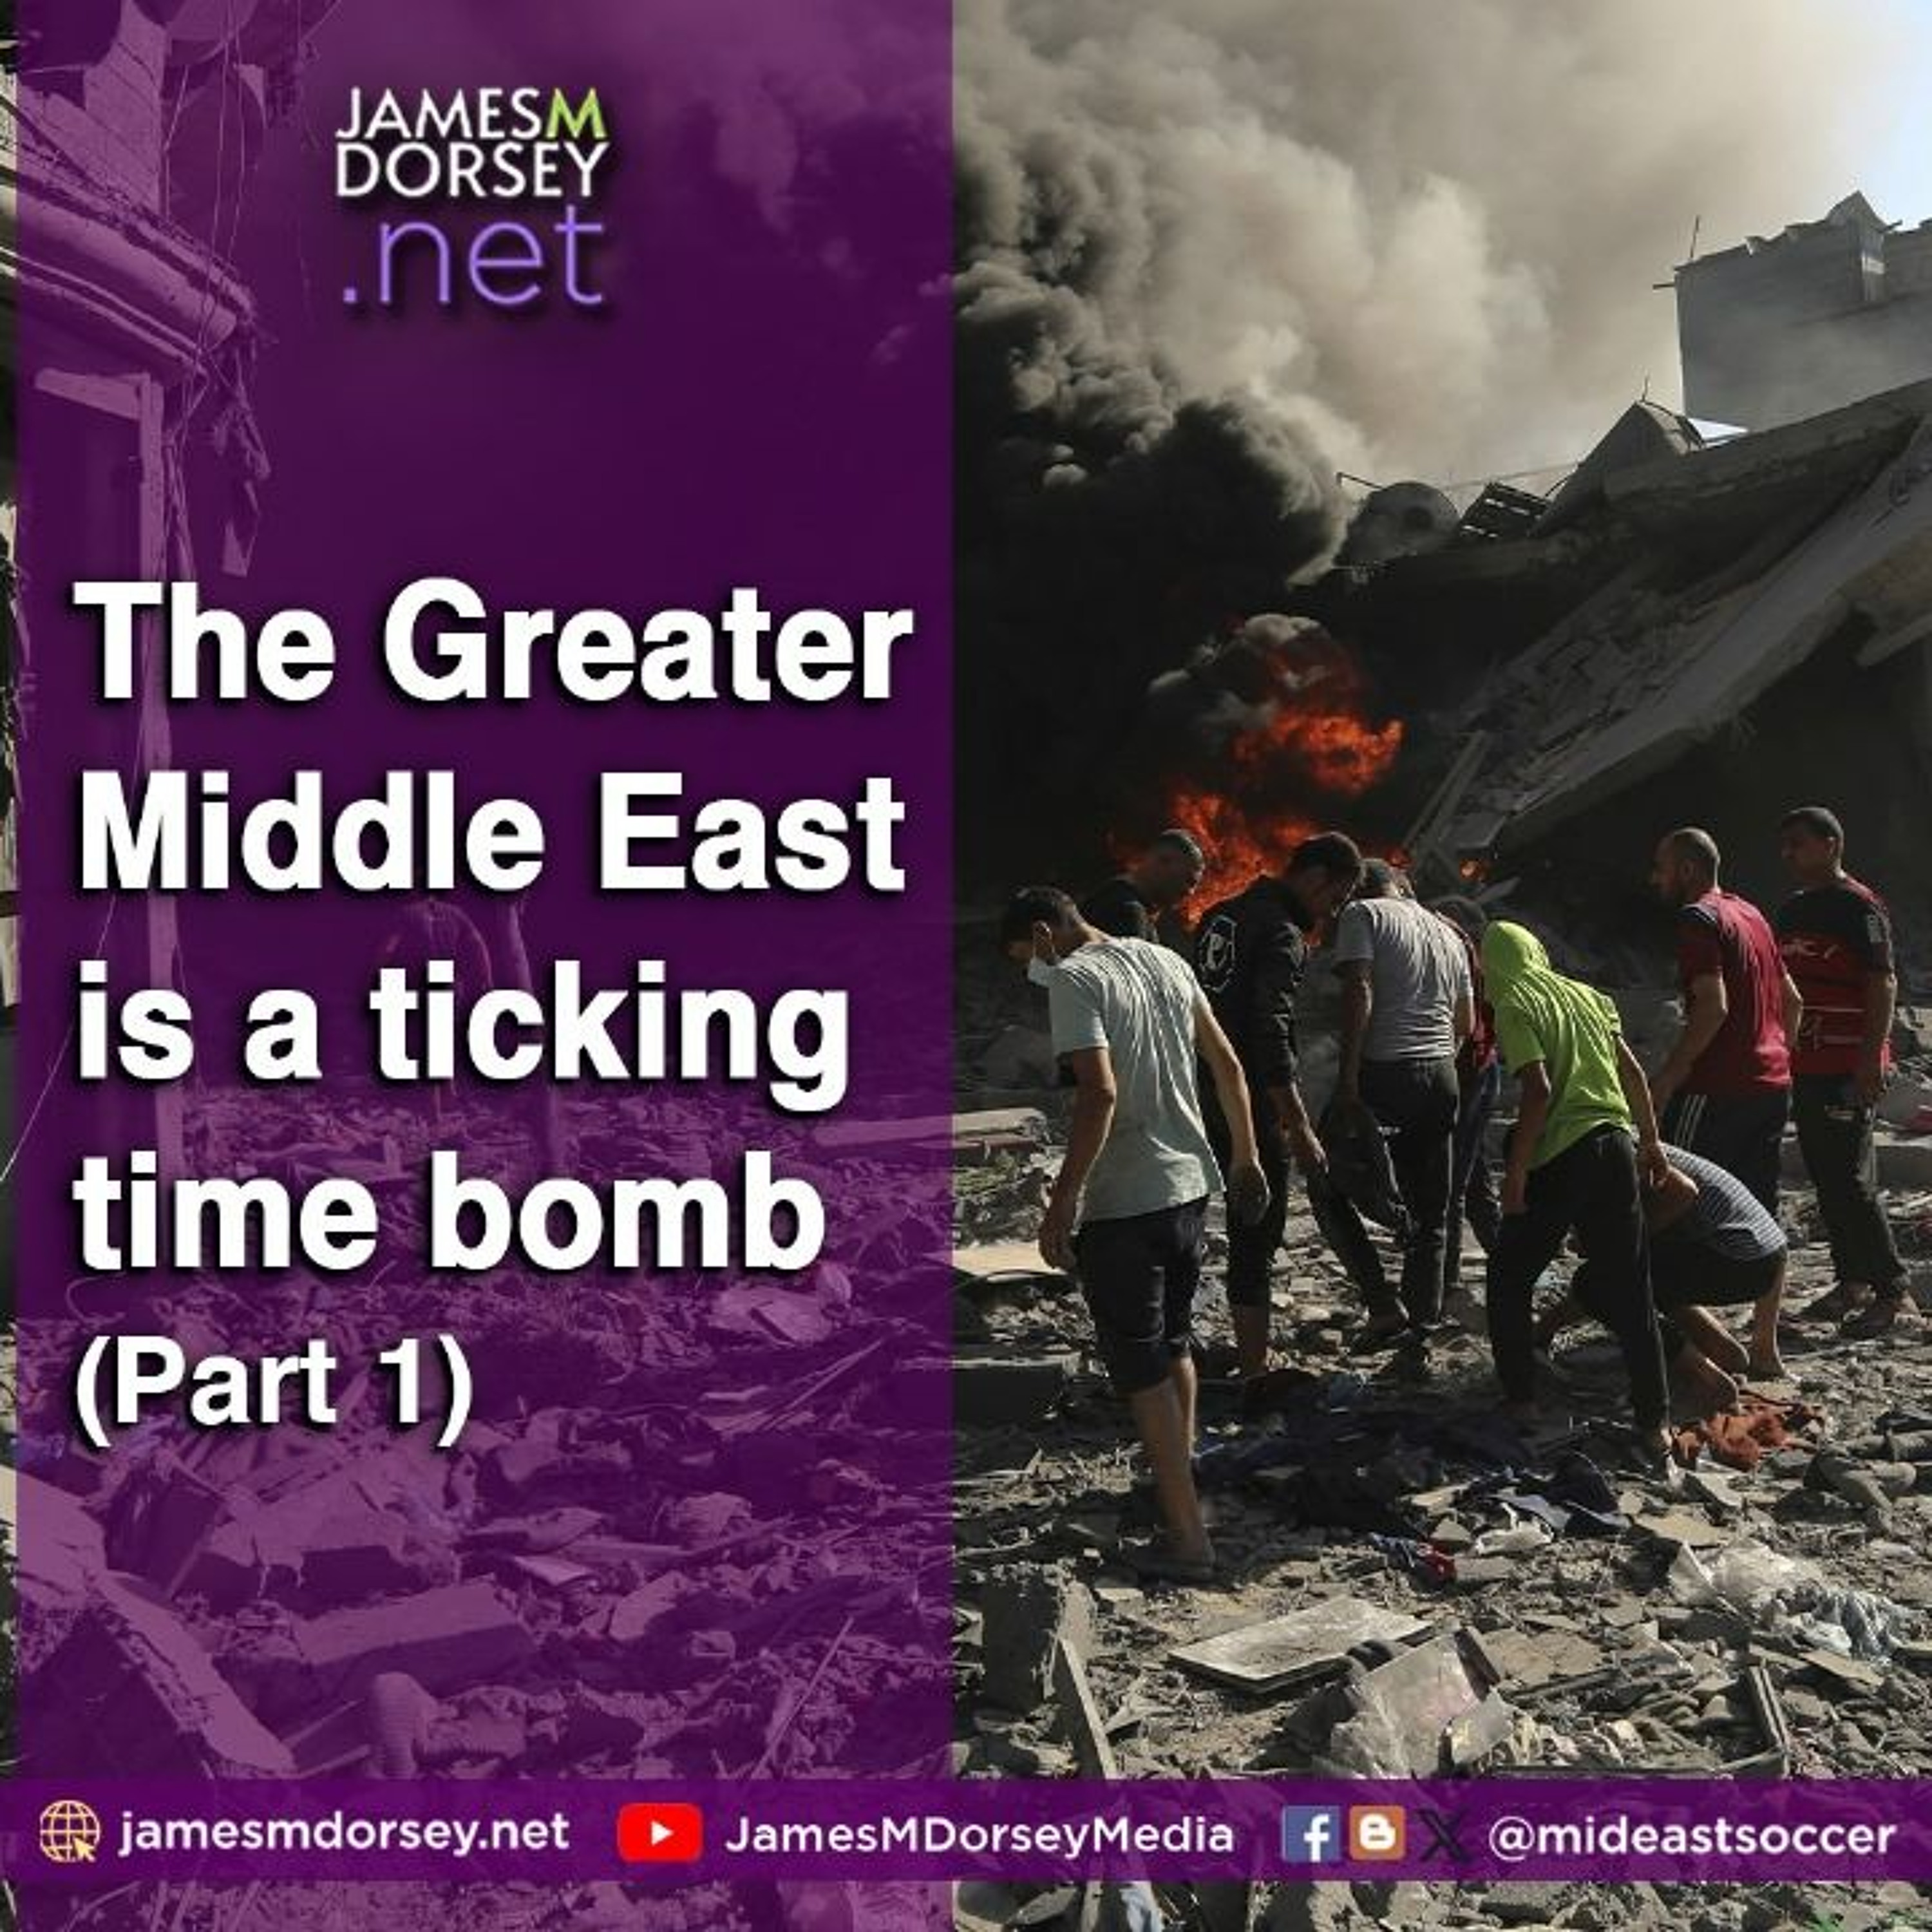 The Greater Middle East Is A Ticking Time Bomb (Part 1)